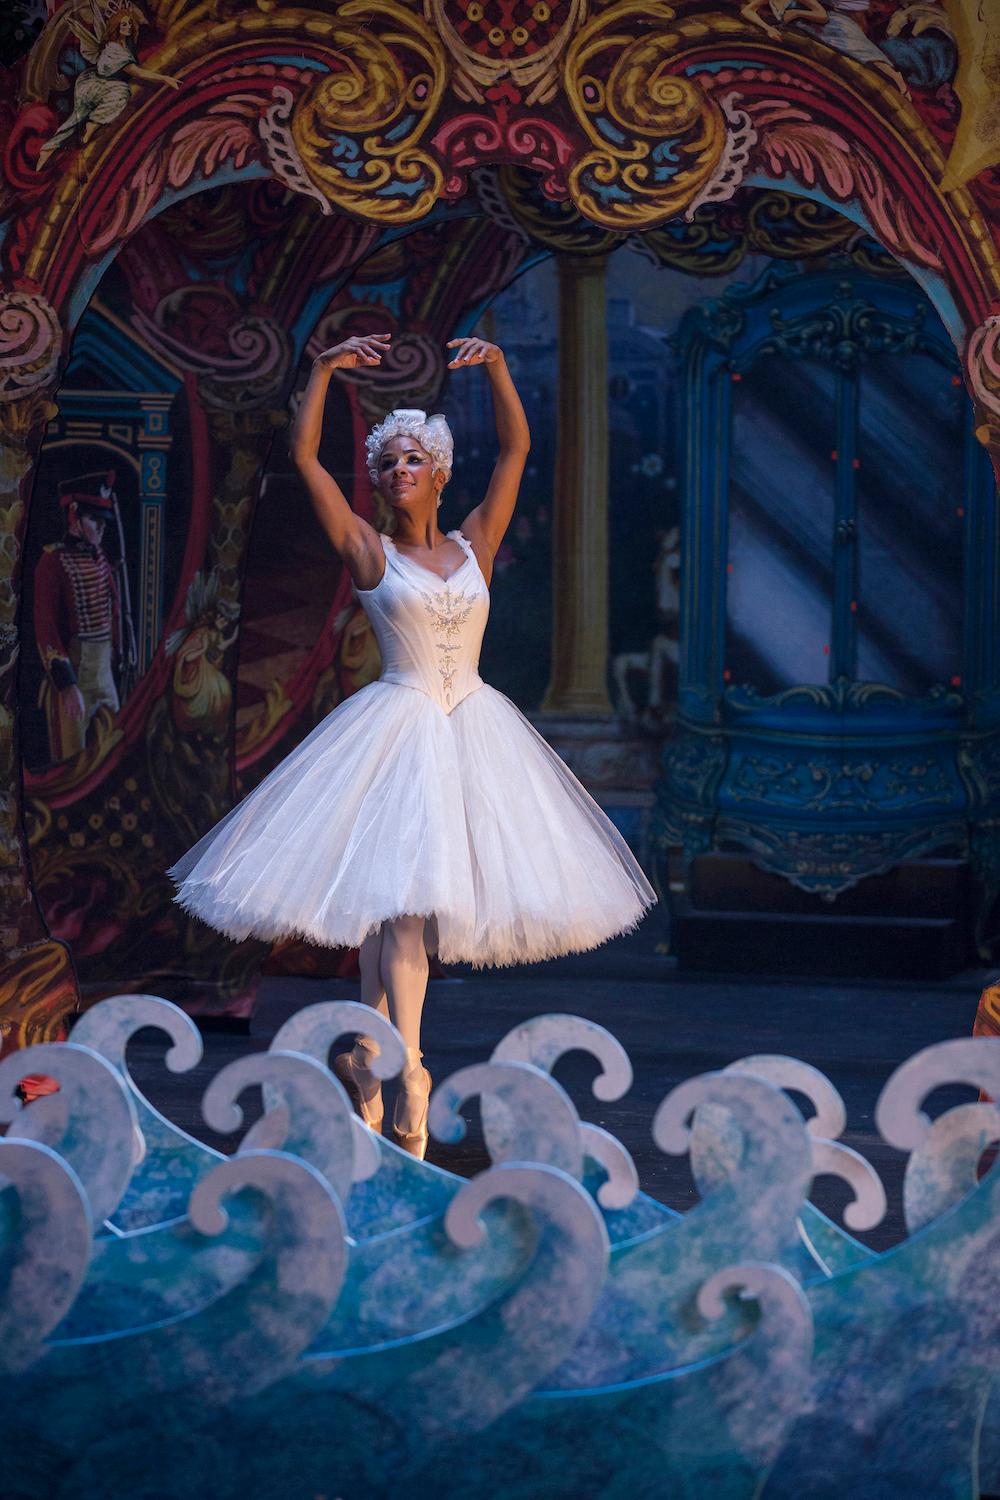 Misty Copeland is the Ballerina Princess in “The Nutcracker and the Four Realms.” (Walt Disney Studio Motion Pictures)